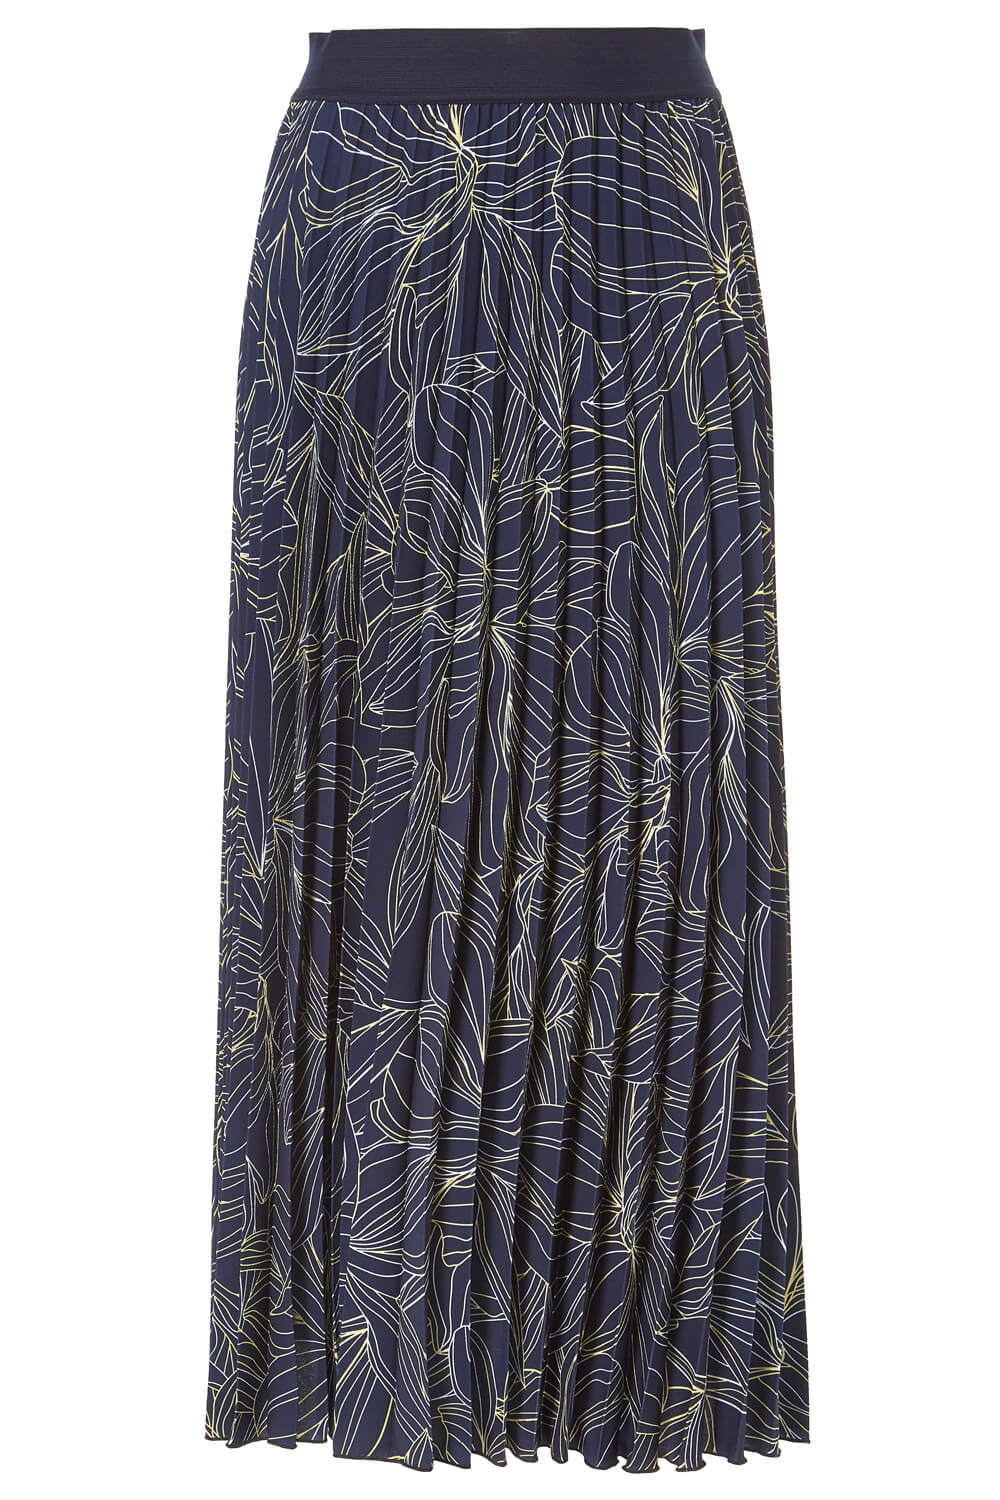 Navy  Linear Floral Print Pleated Midi Skirt, Image 5 of 5